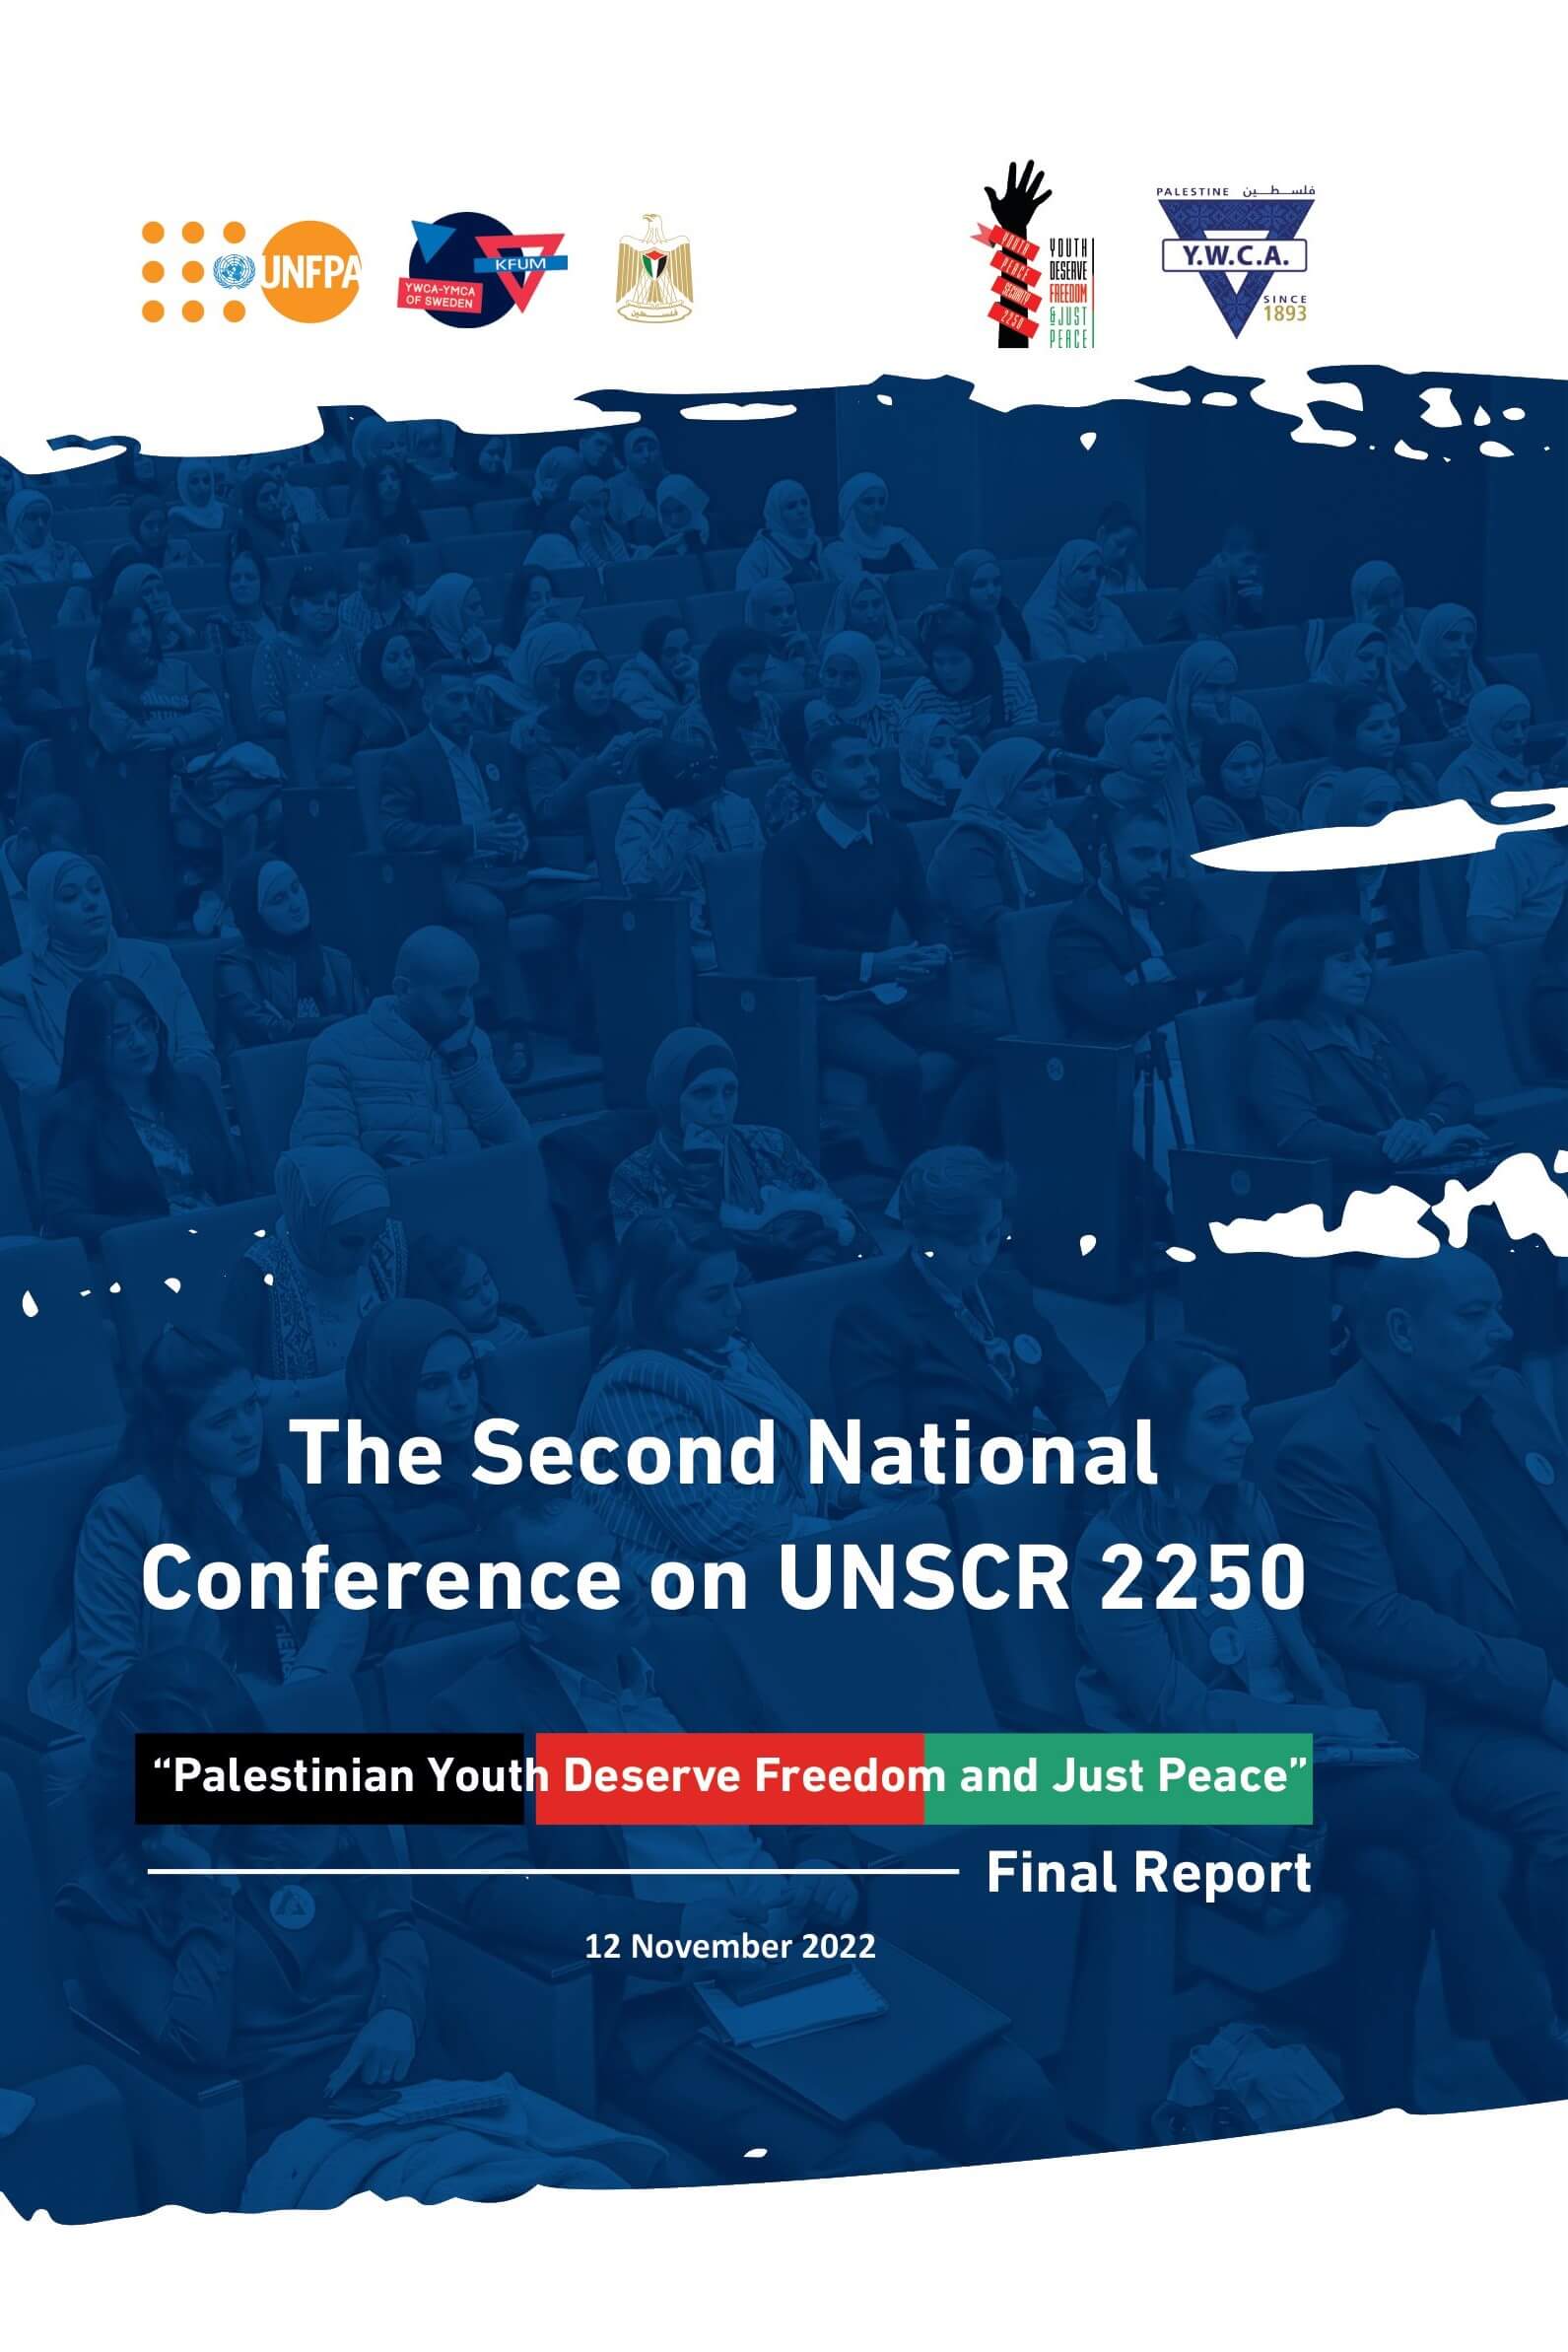 The Second National Conference on UNSCR 2250